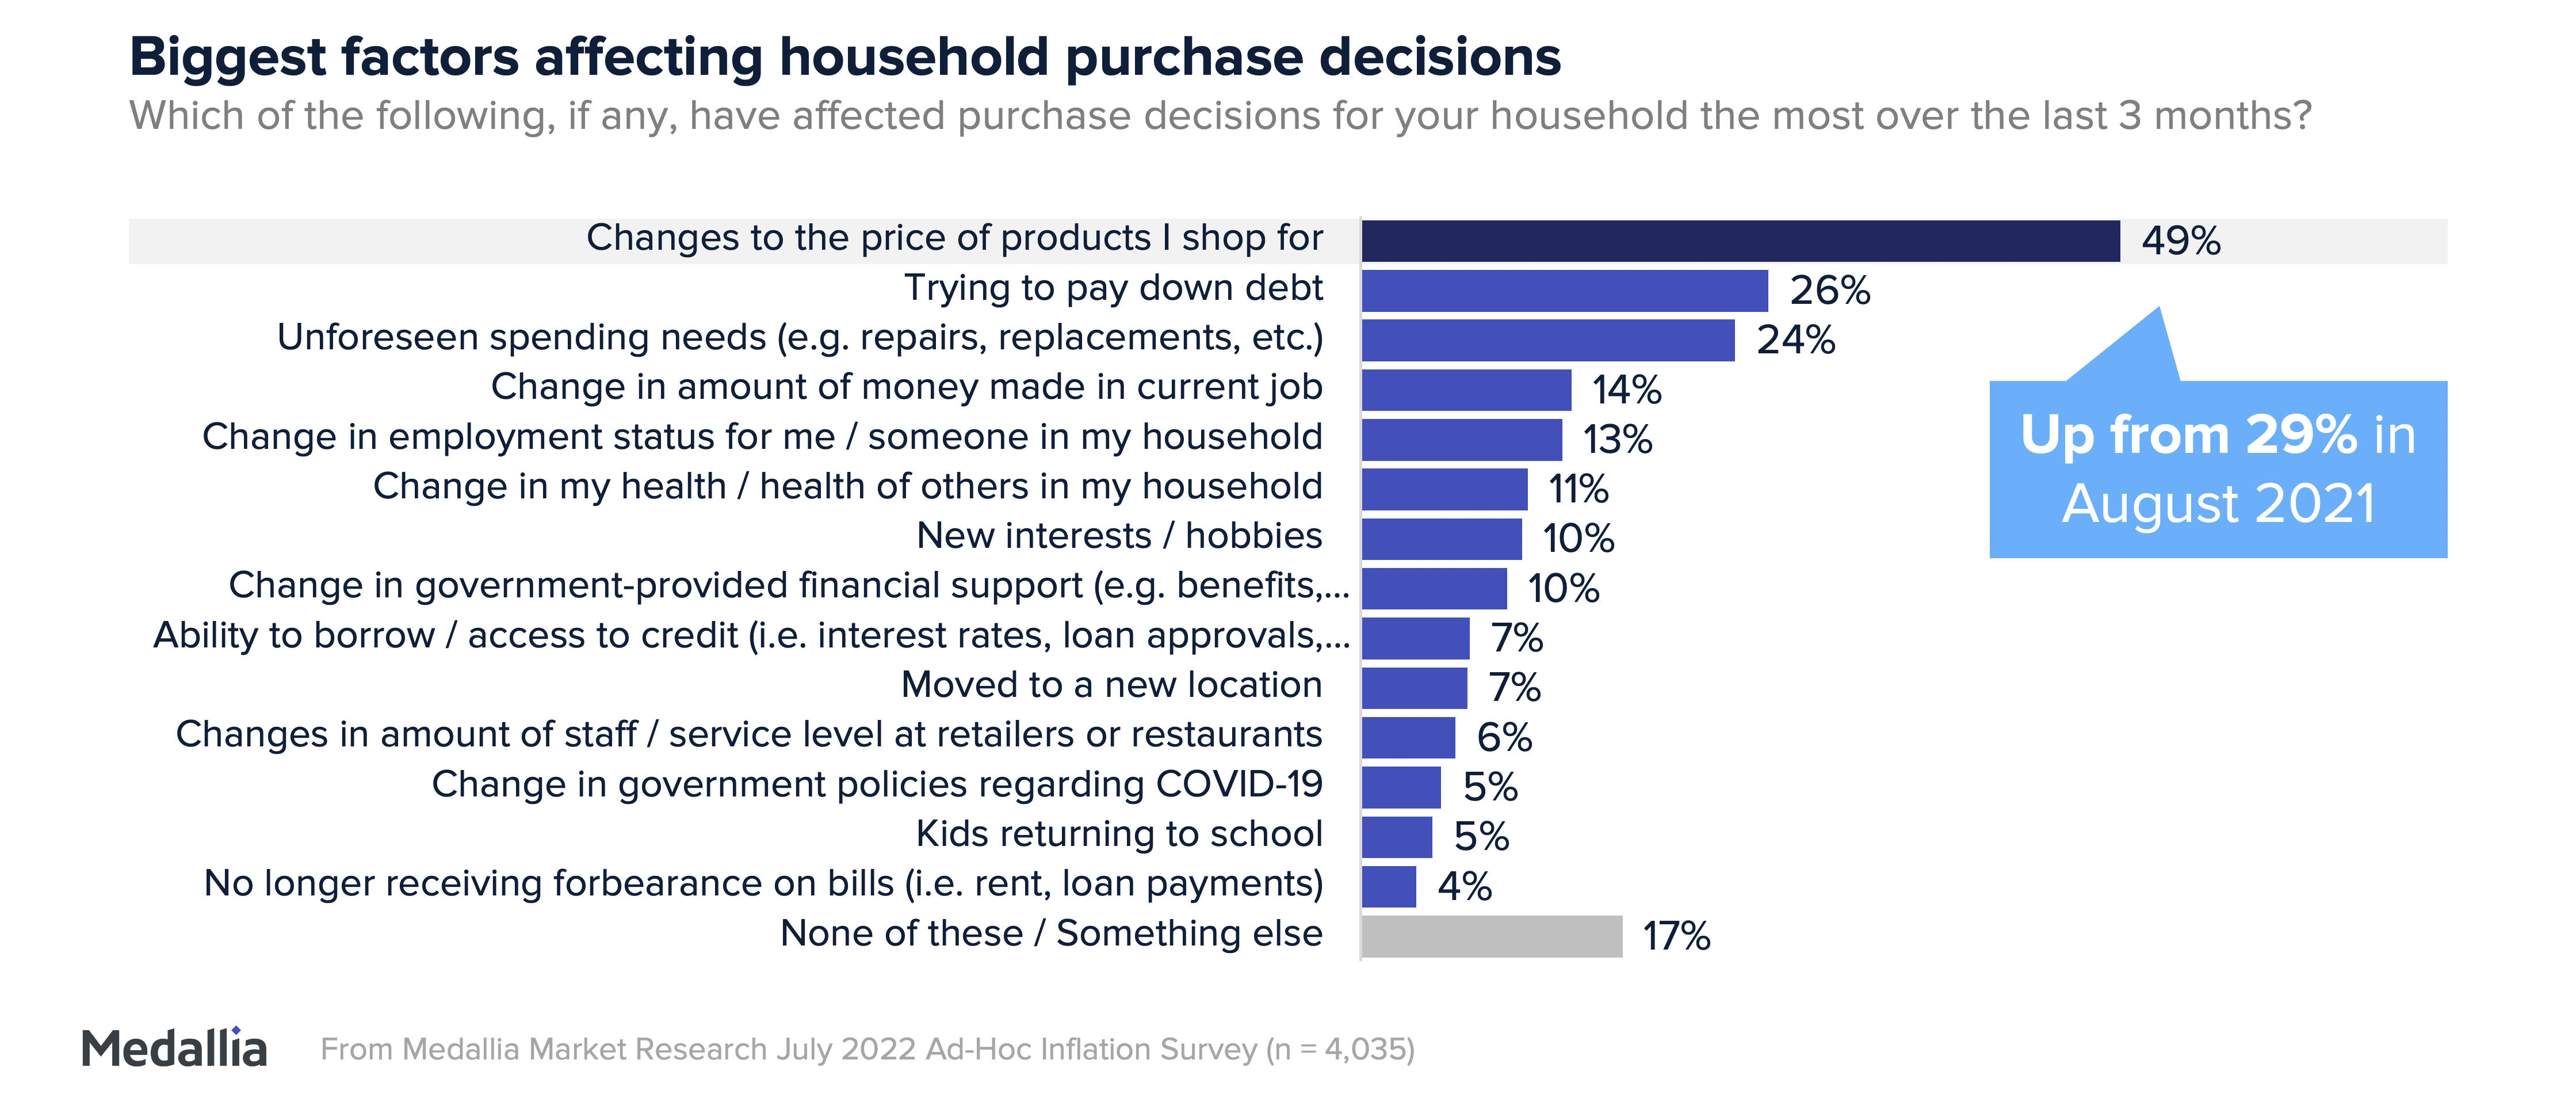 Biggest factors affecting household purchase decisions. “Changes to the prices of products I shop for” is up 29% since August 2021